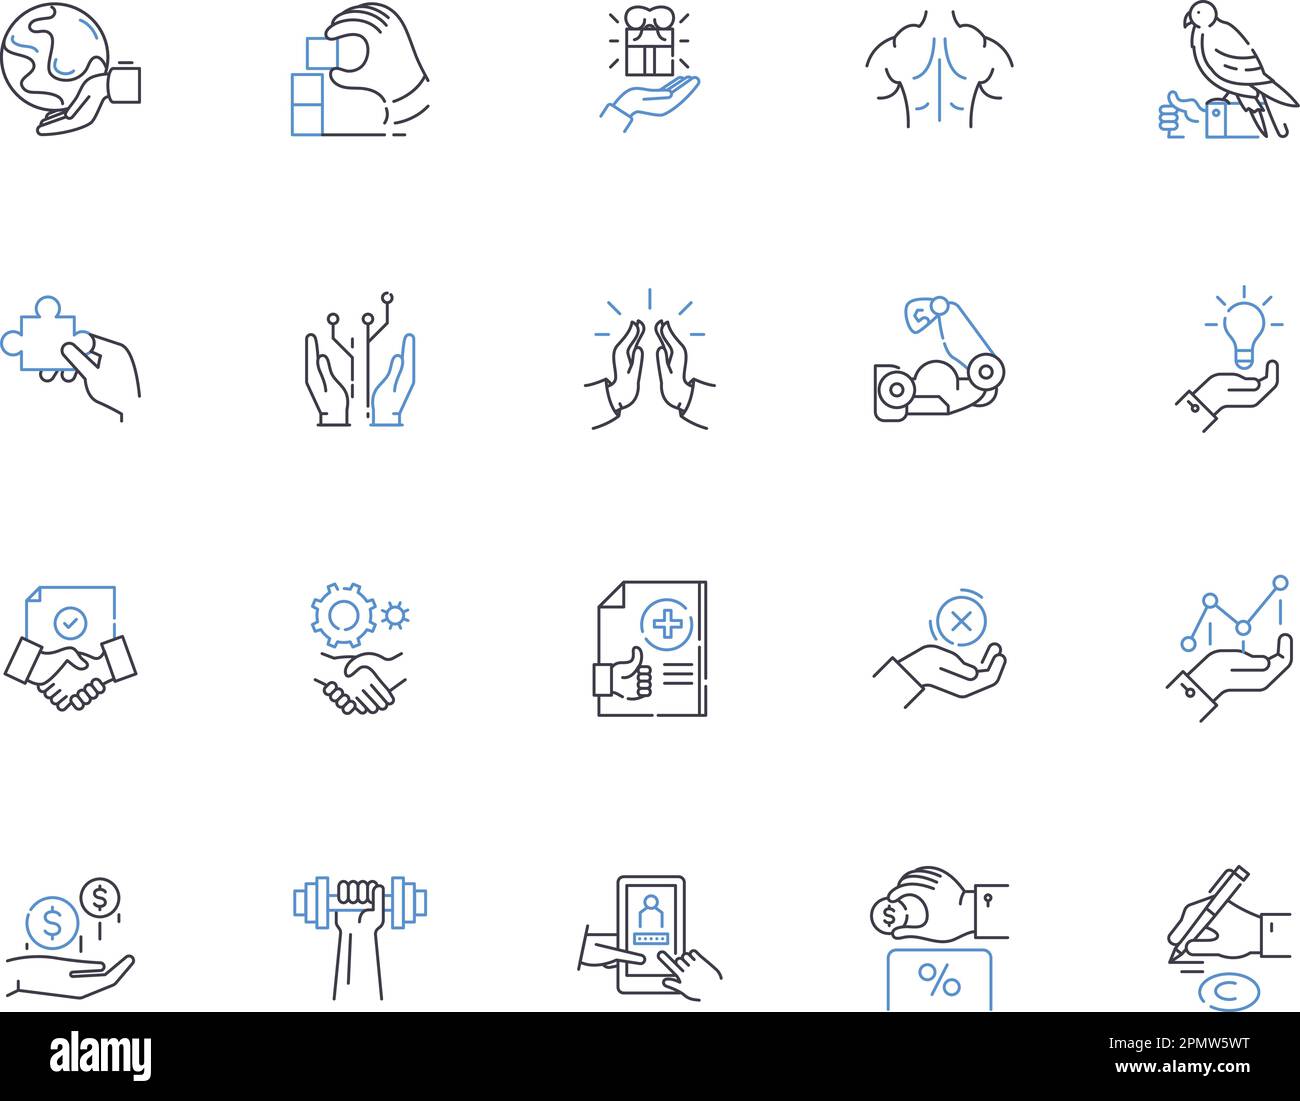 Hand gesture outline icons collection. gesticulating, waving, pointing, beckoning, signaling, clapping, shaking vector and illustration concept set Stock Vector